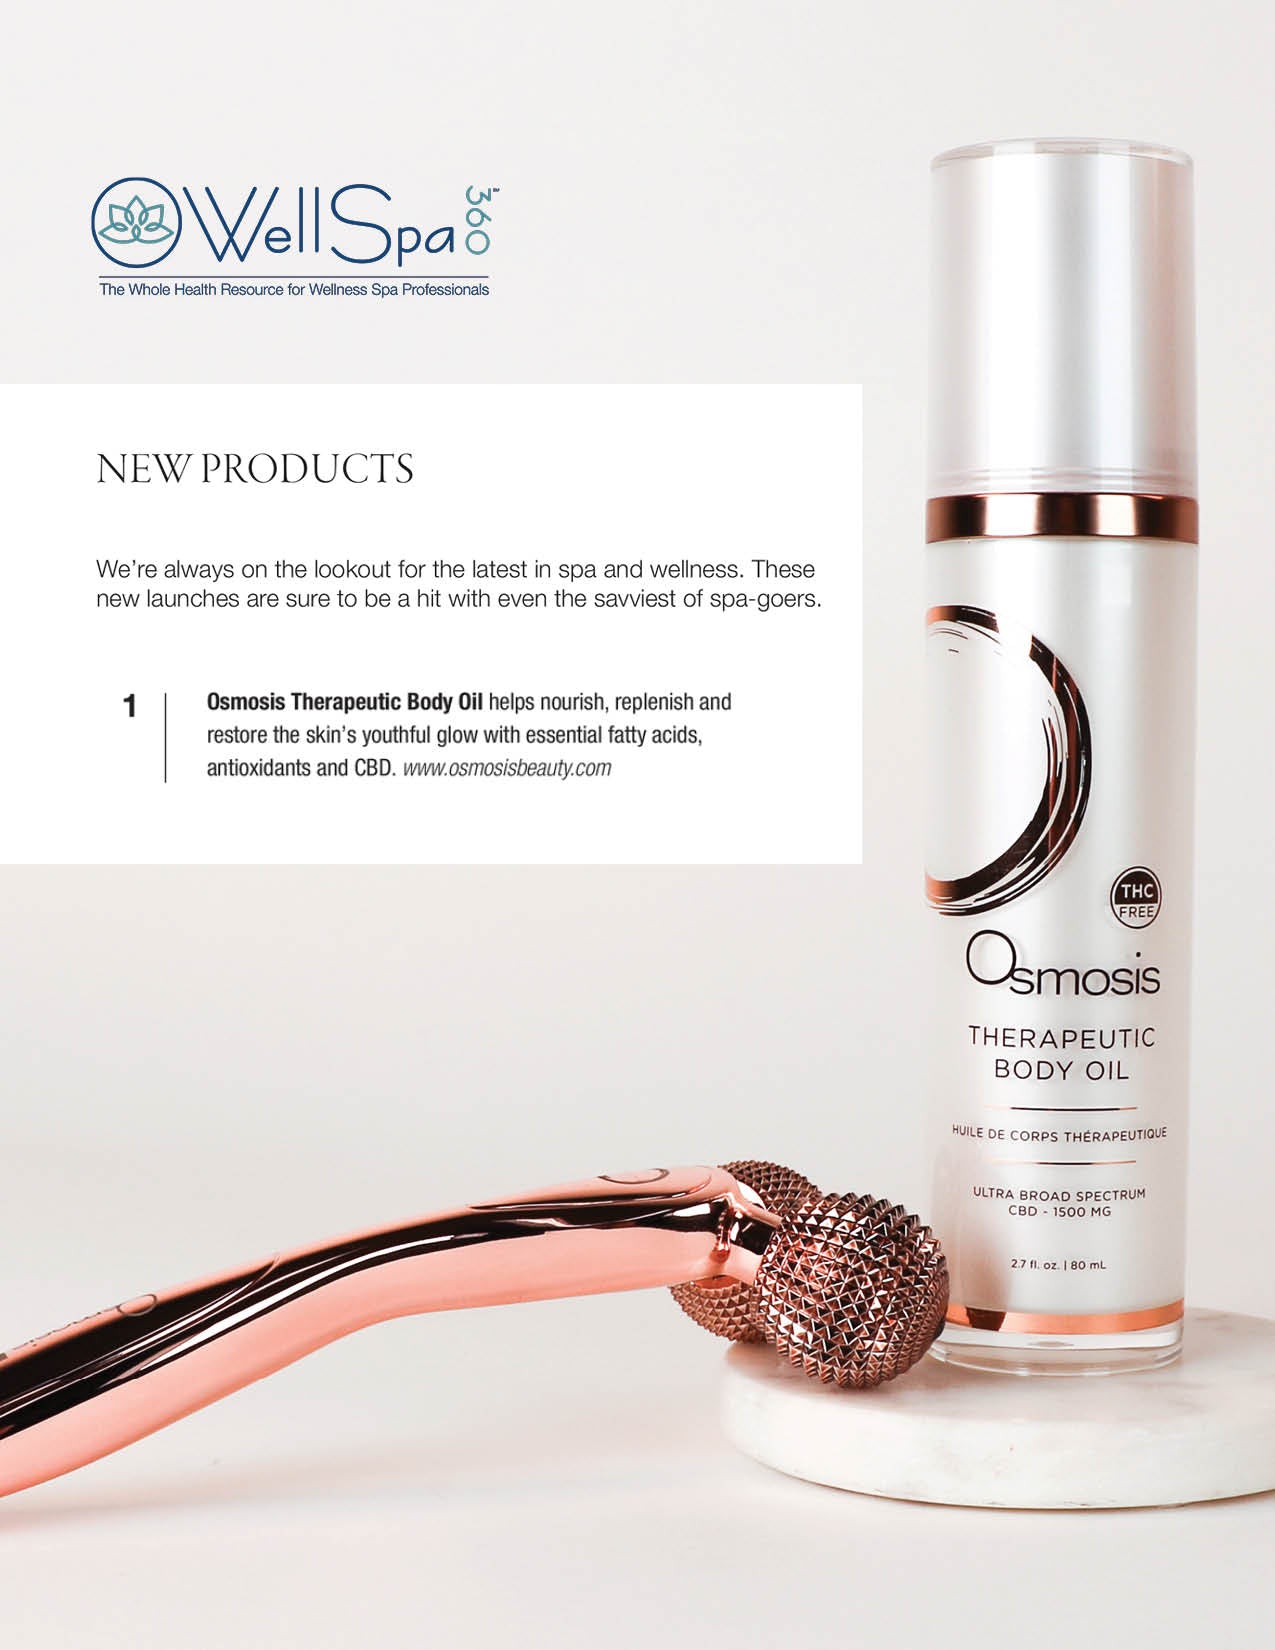 Therapeutic Body Oil was featured in the new product section in the March/April issue of Wellspa360